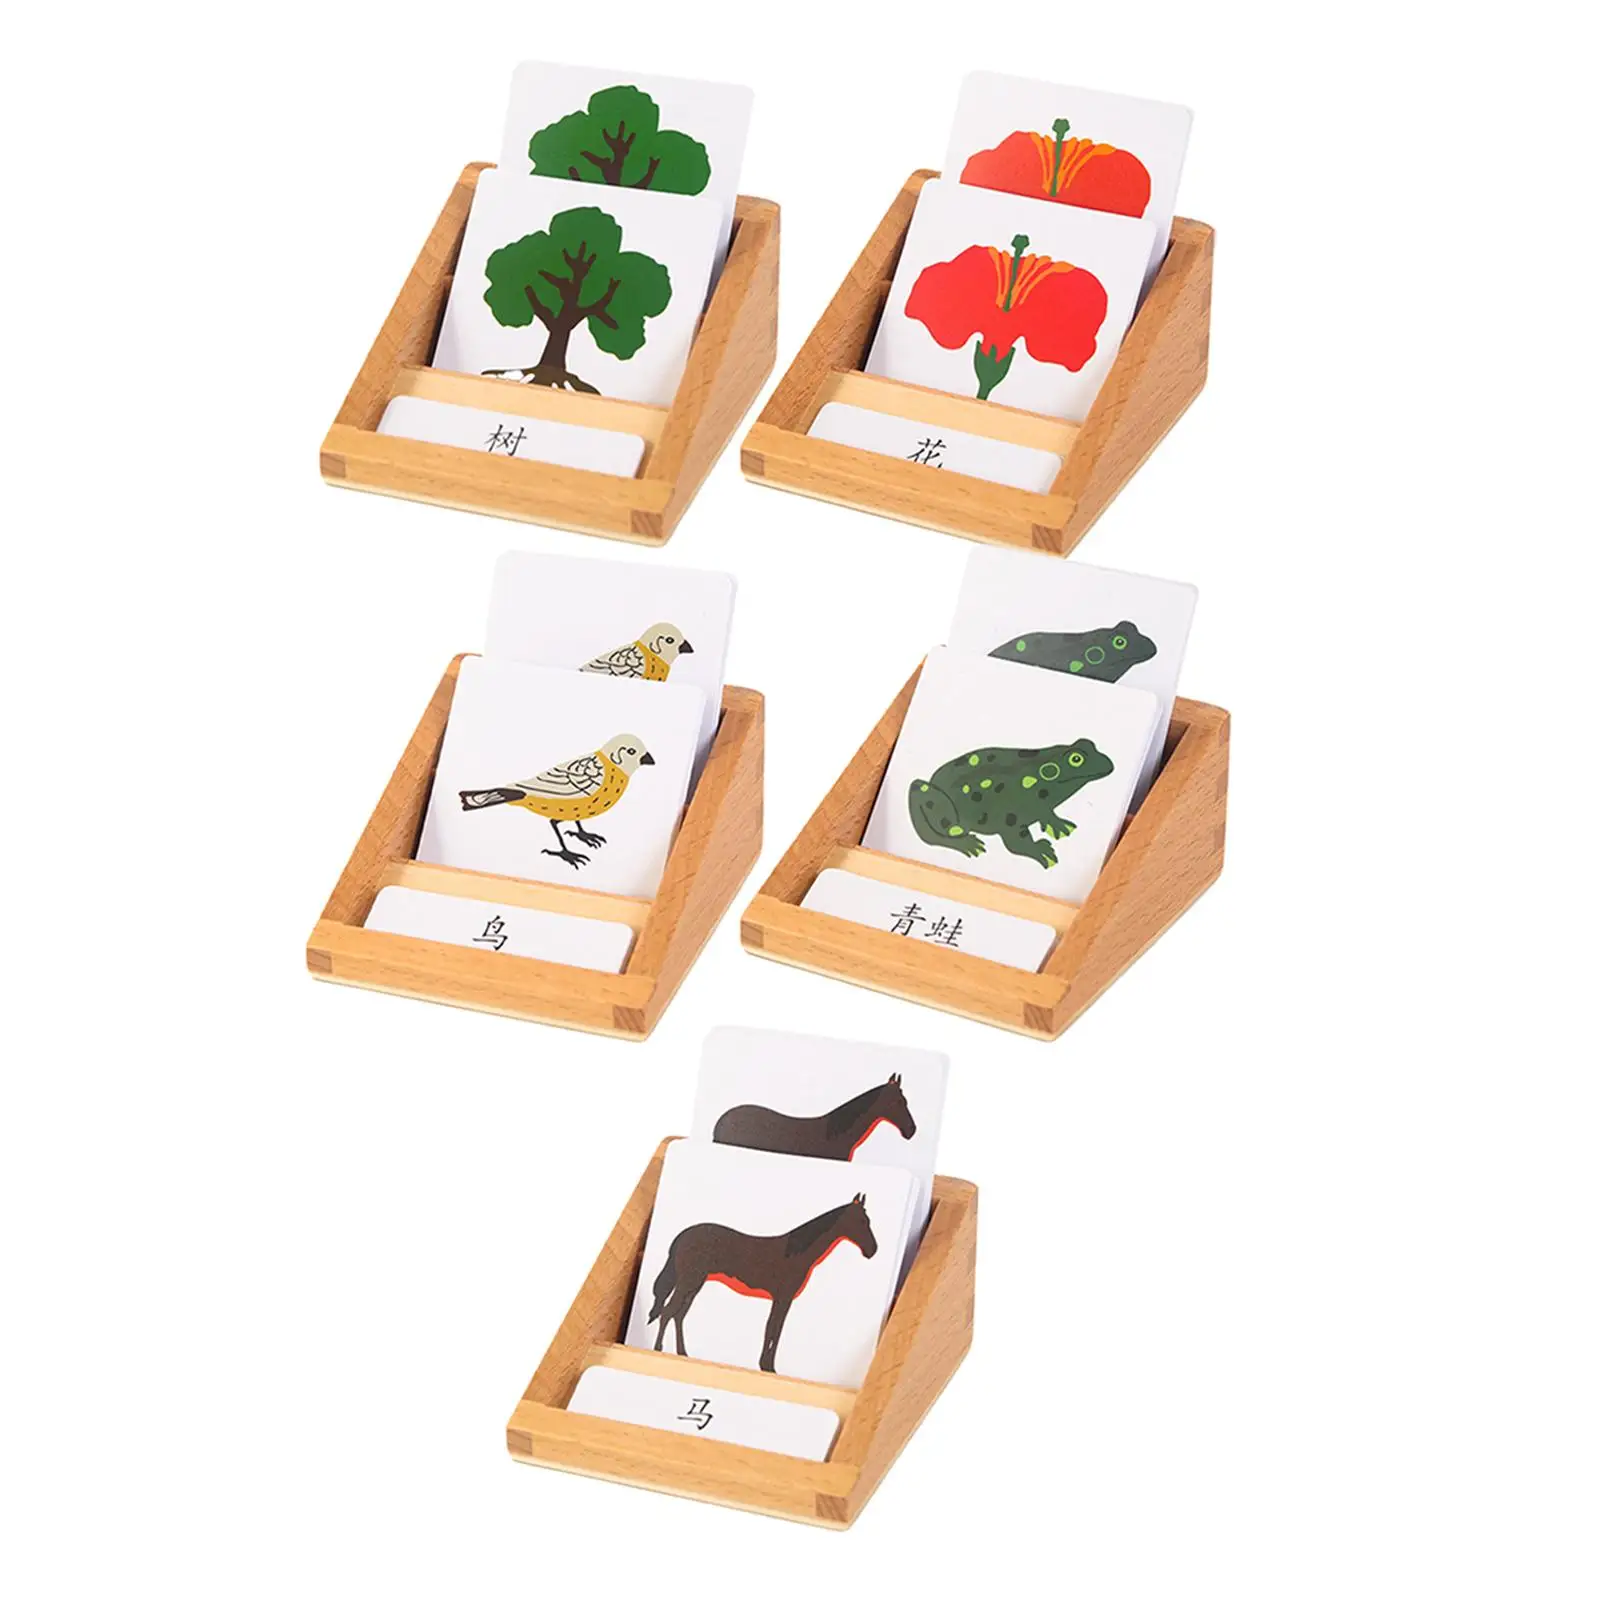 PVC Animal Growth Life Cycle Playset Early Educational Classroom Toys Cognitive for 4-8 Years Olds Toddlers Children Kids